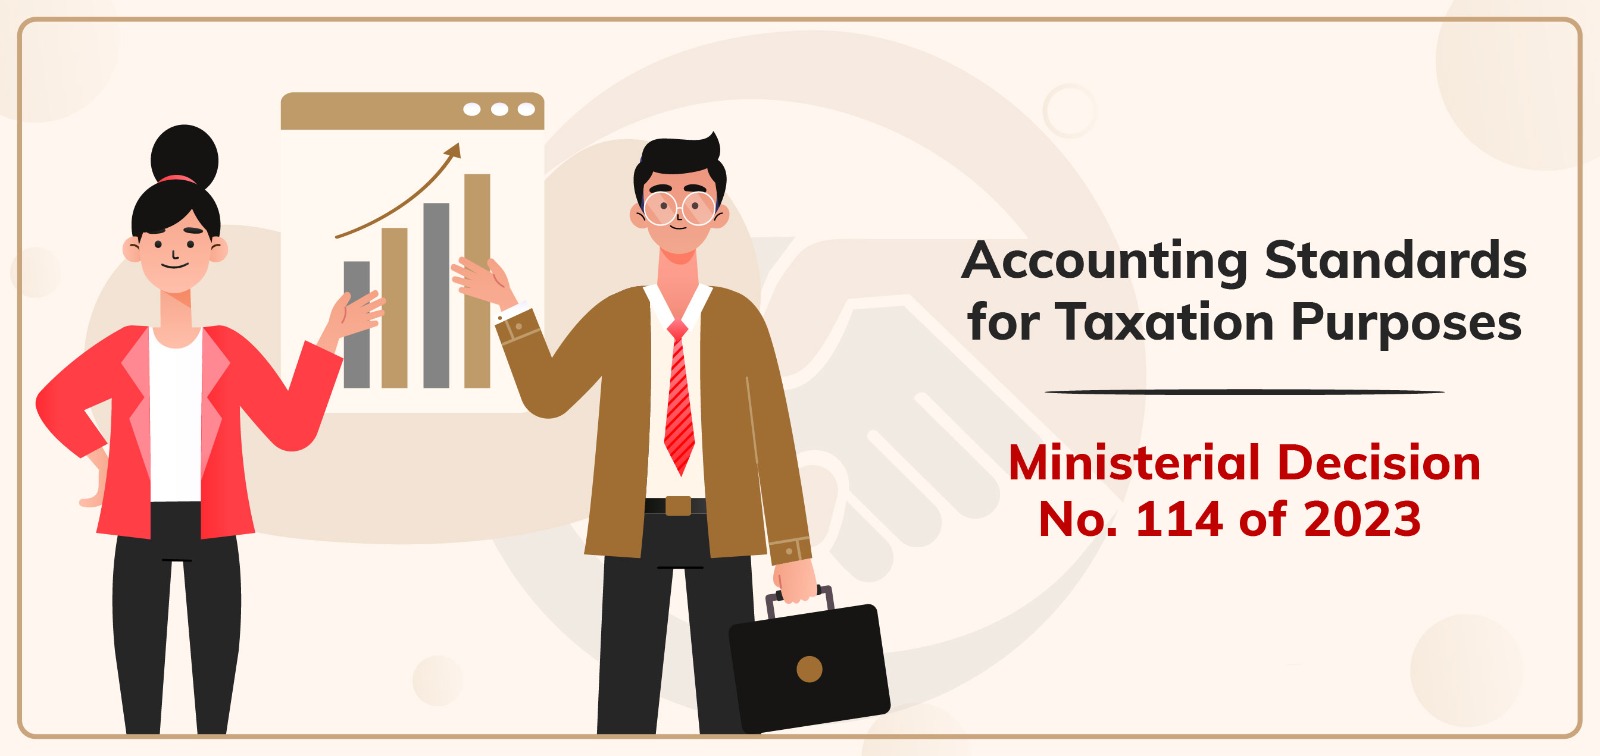 Accounting Standards for Taxation Purposes